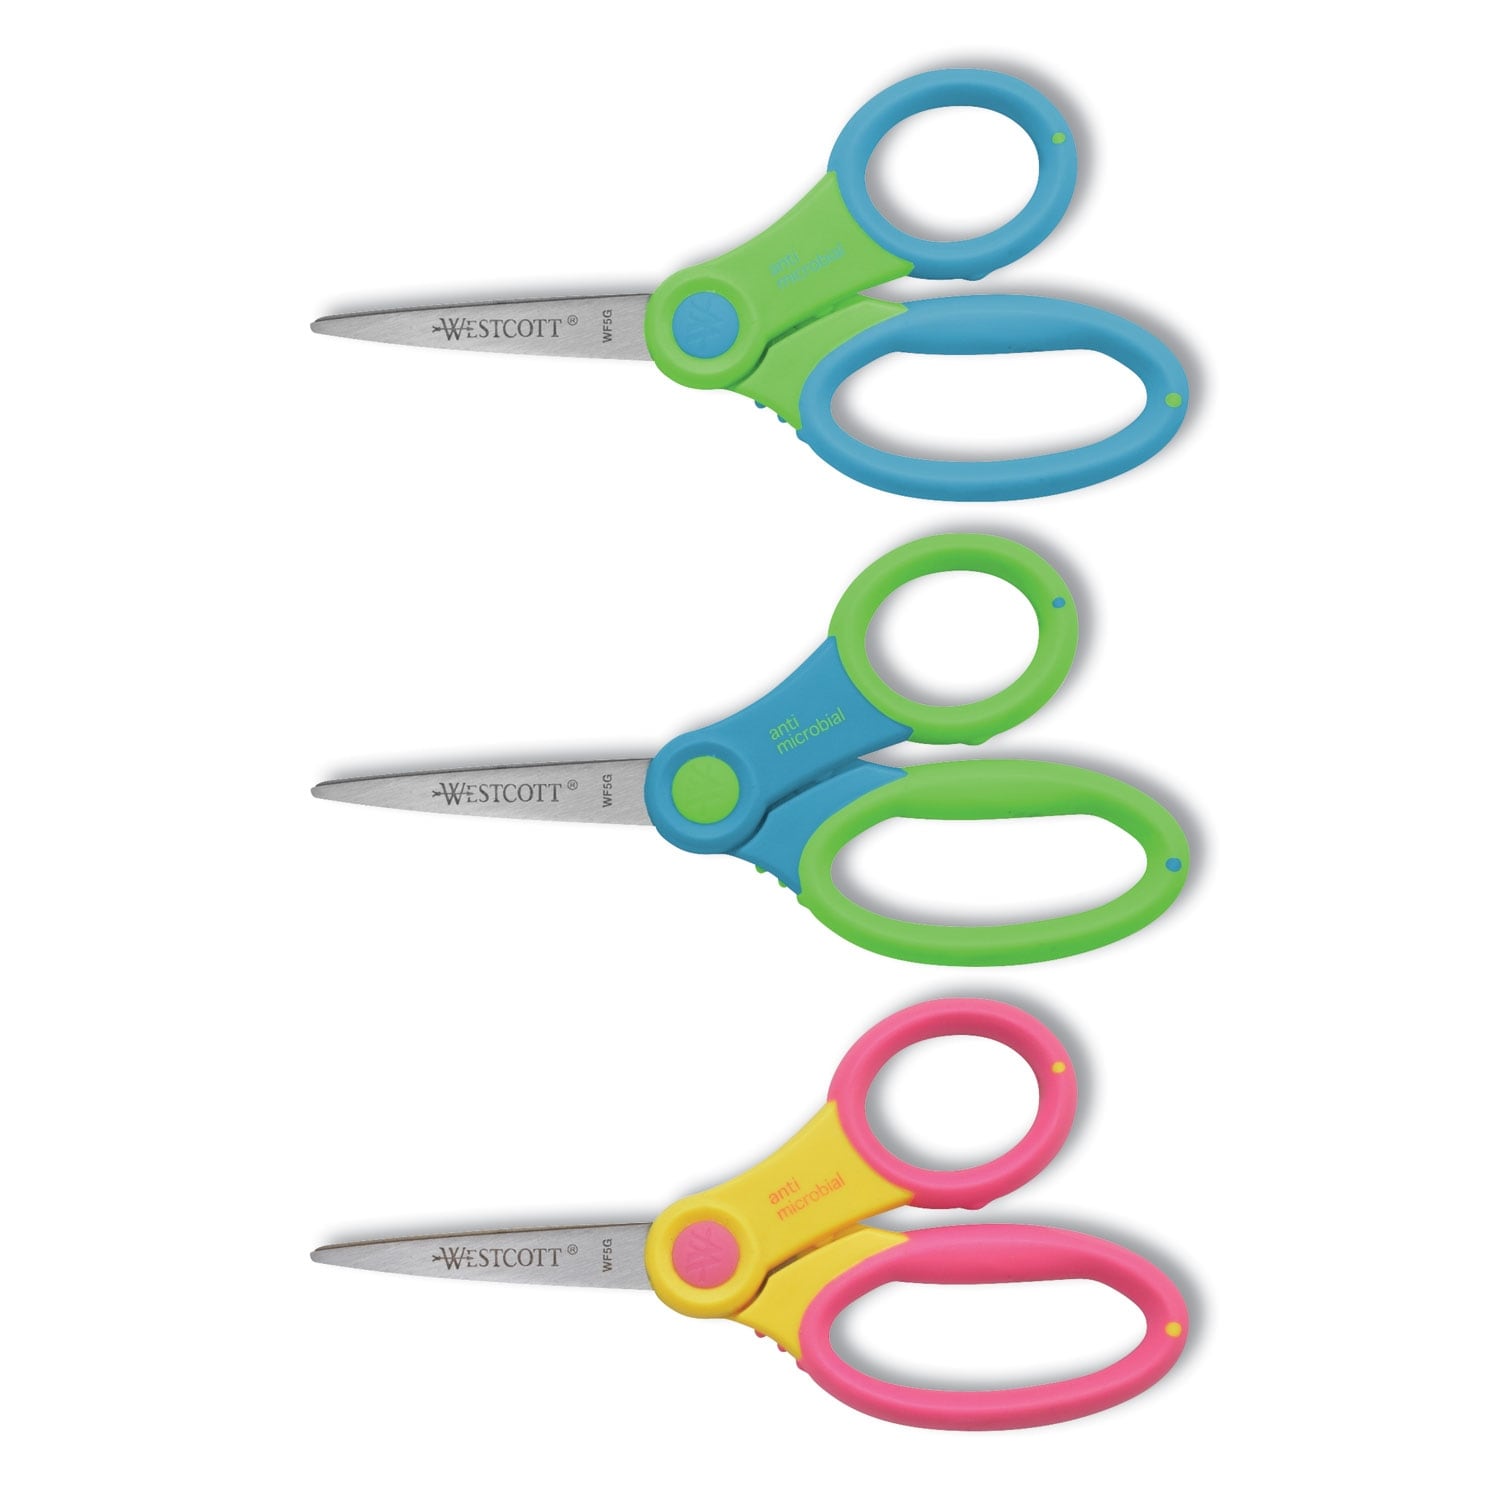 Ultra Soft Handle Scissors w/Antimicrobial Protection, Assorted